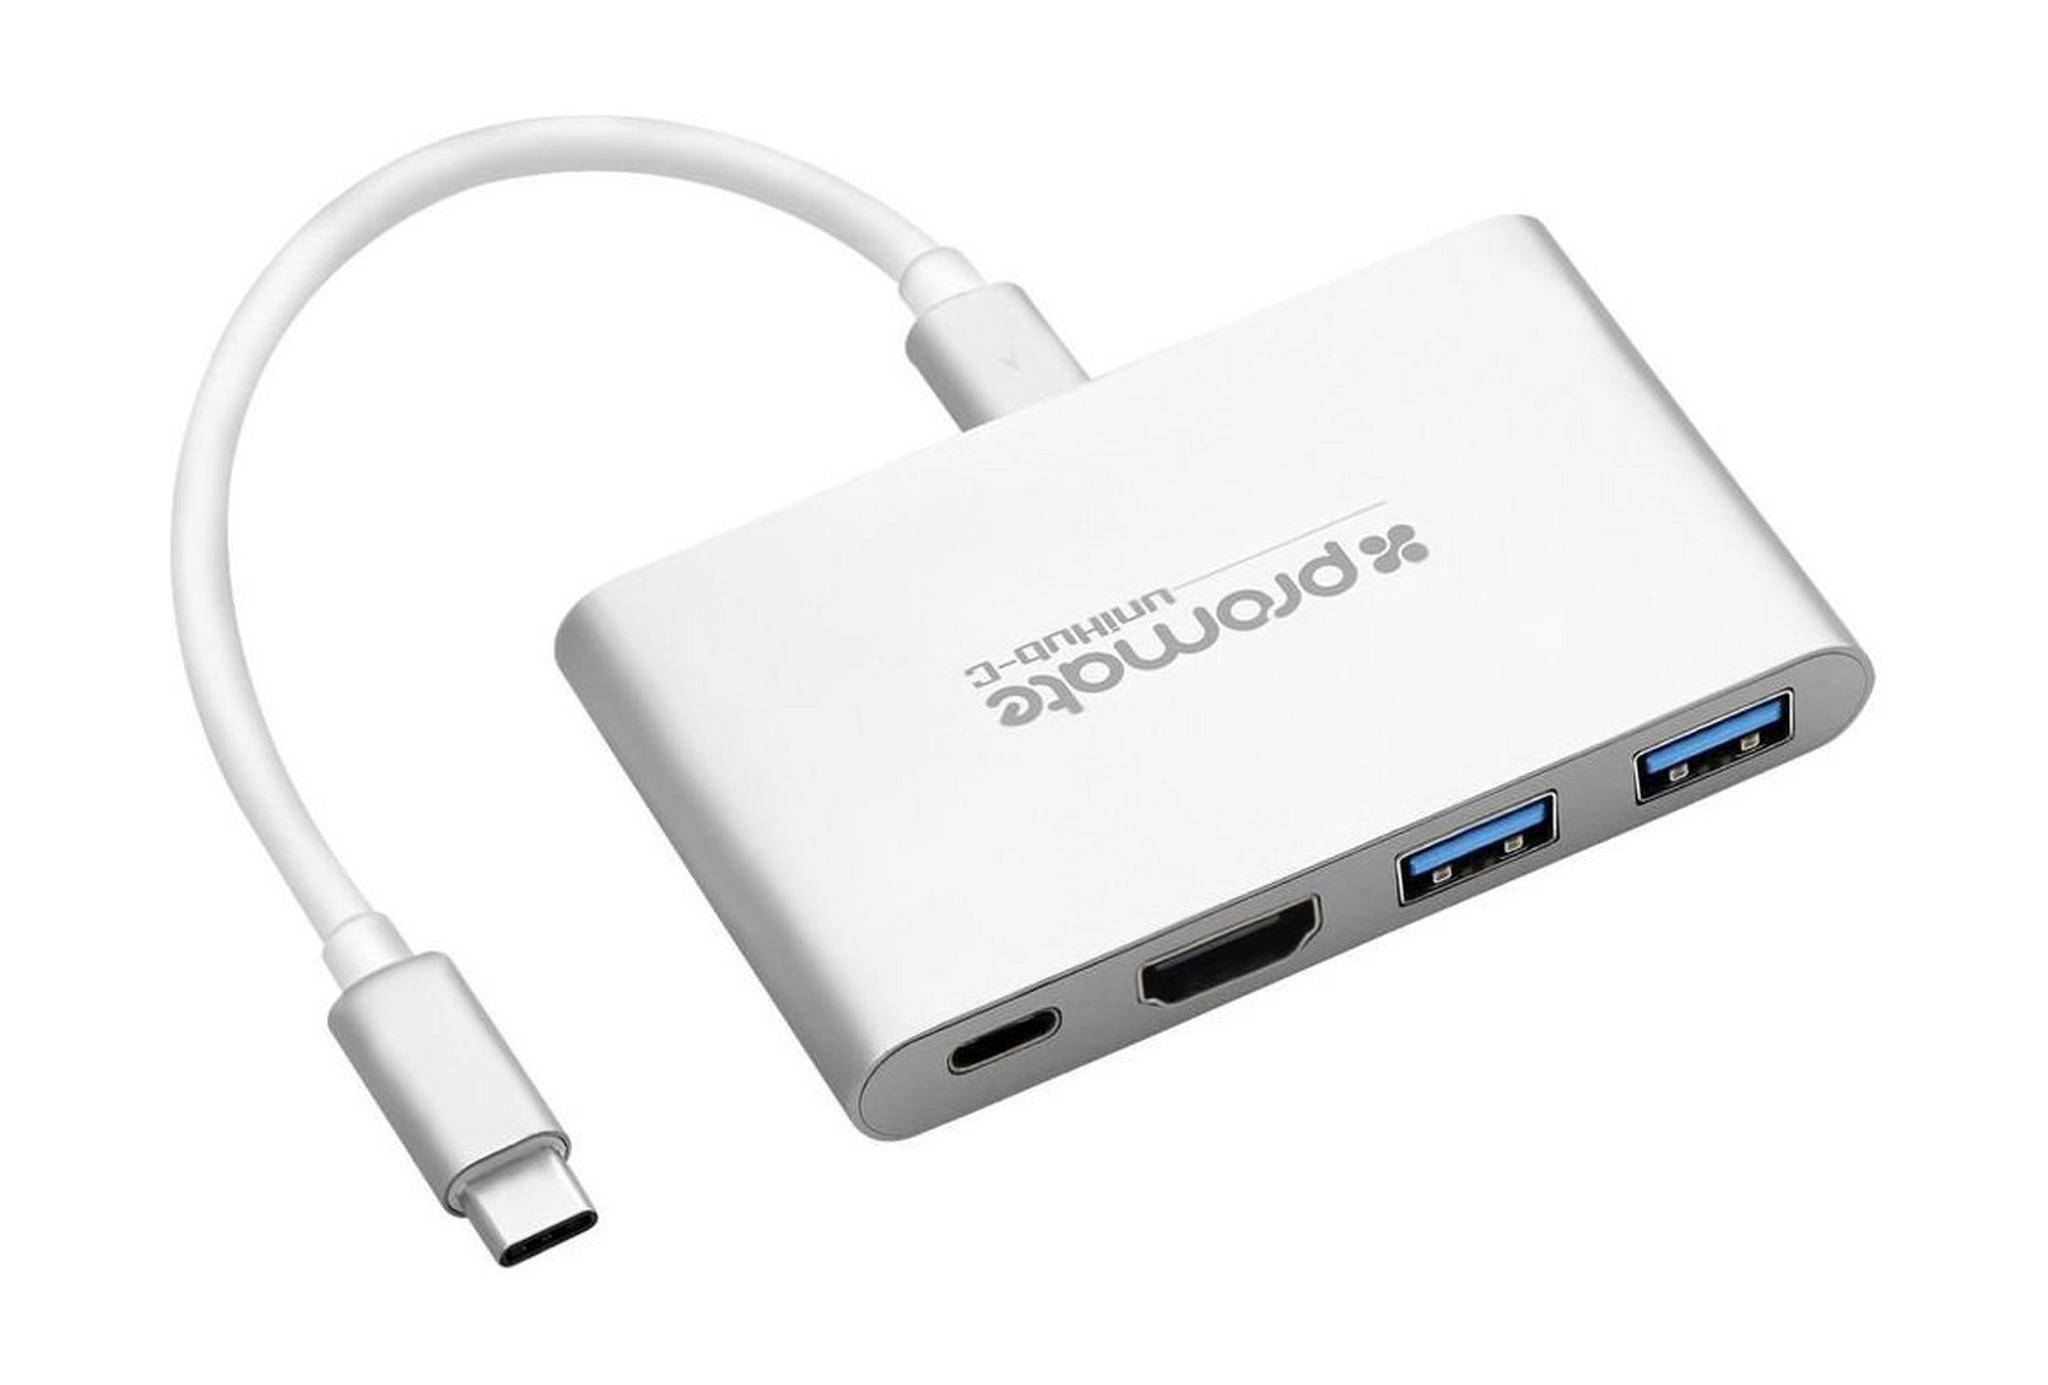 Promate 4-in-1 Compact USB 3.1 Type C Hub  - White